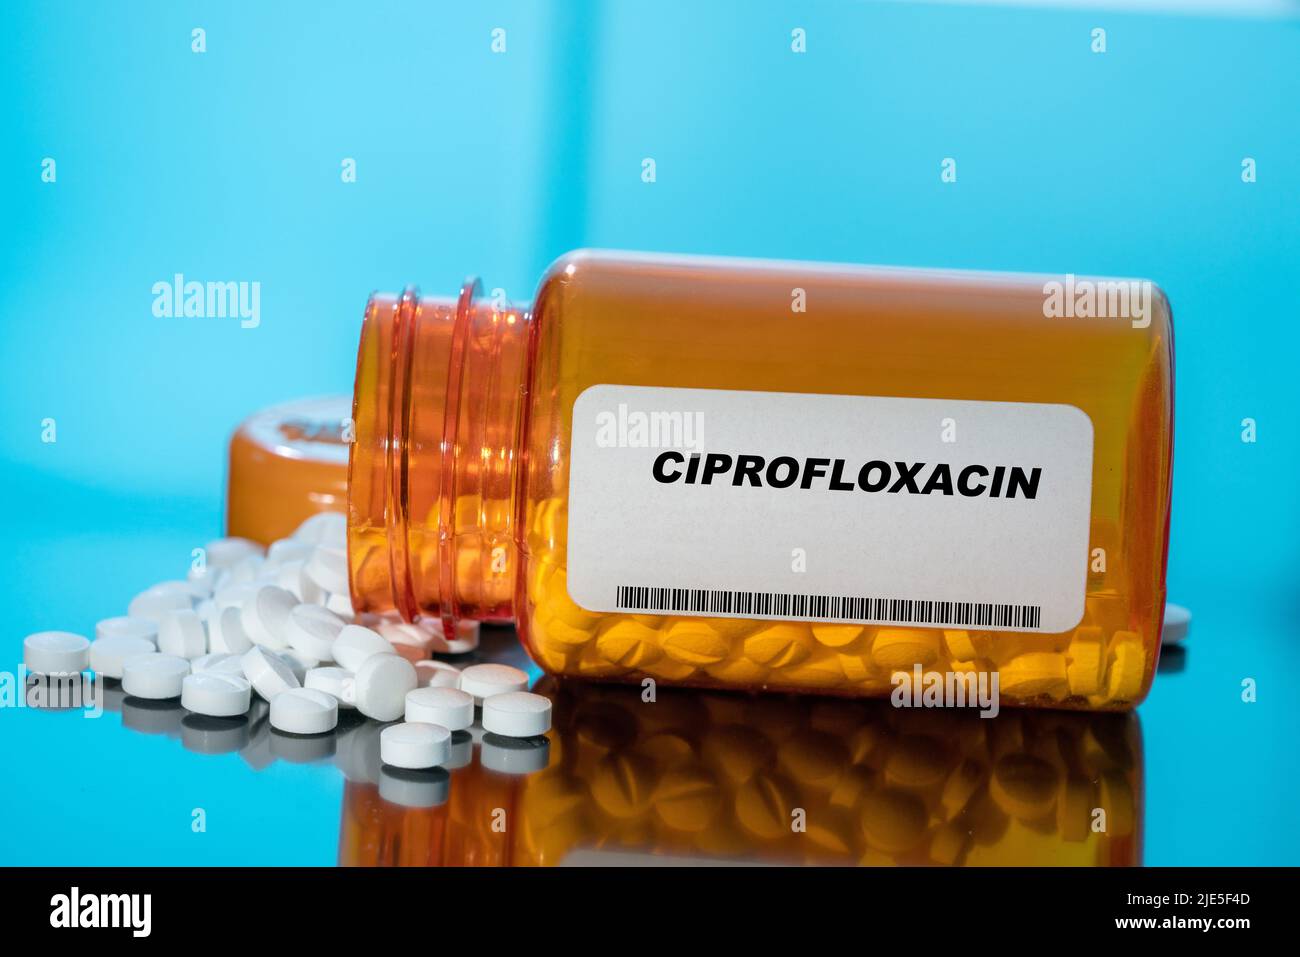 Ciprofloxacin white medical pills and tablets spilling out of a drug bottle. Macro top down view with copy space. Stock Photo